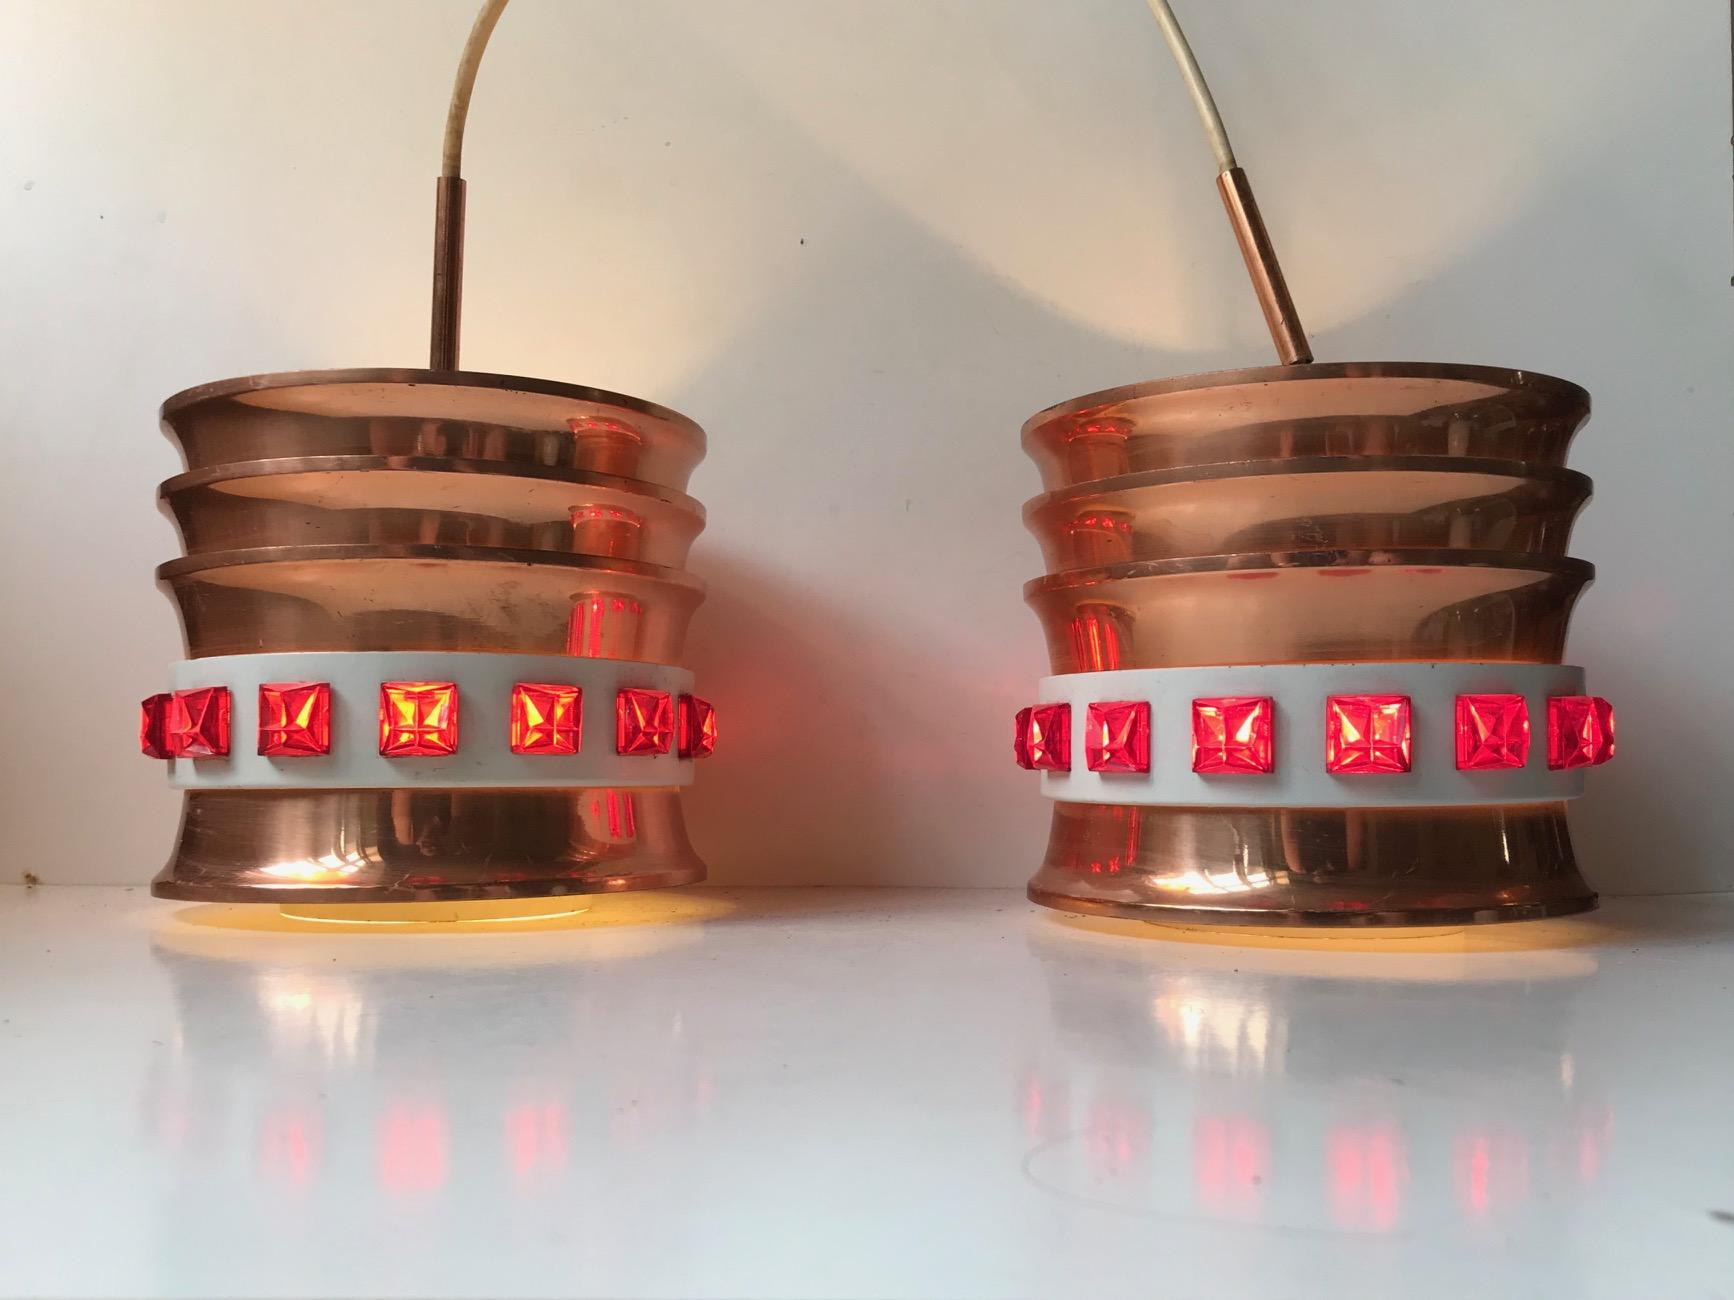 Here is the chance to acquire a pair of ceiling lamps made in a country no longer in existence. The former DDR - Eastern Germany. These lights were made by VEB Metalldrücke in Halle during the early 1970s. They are made from solid copper set with